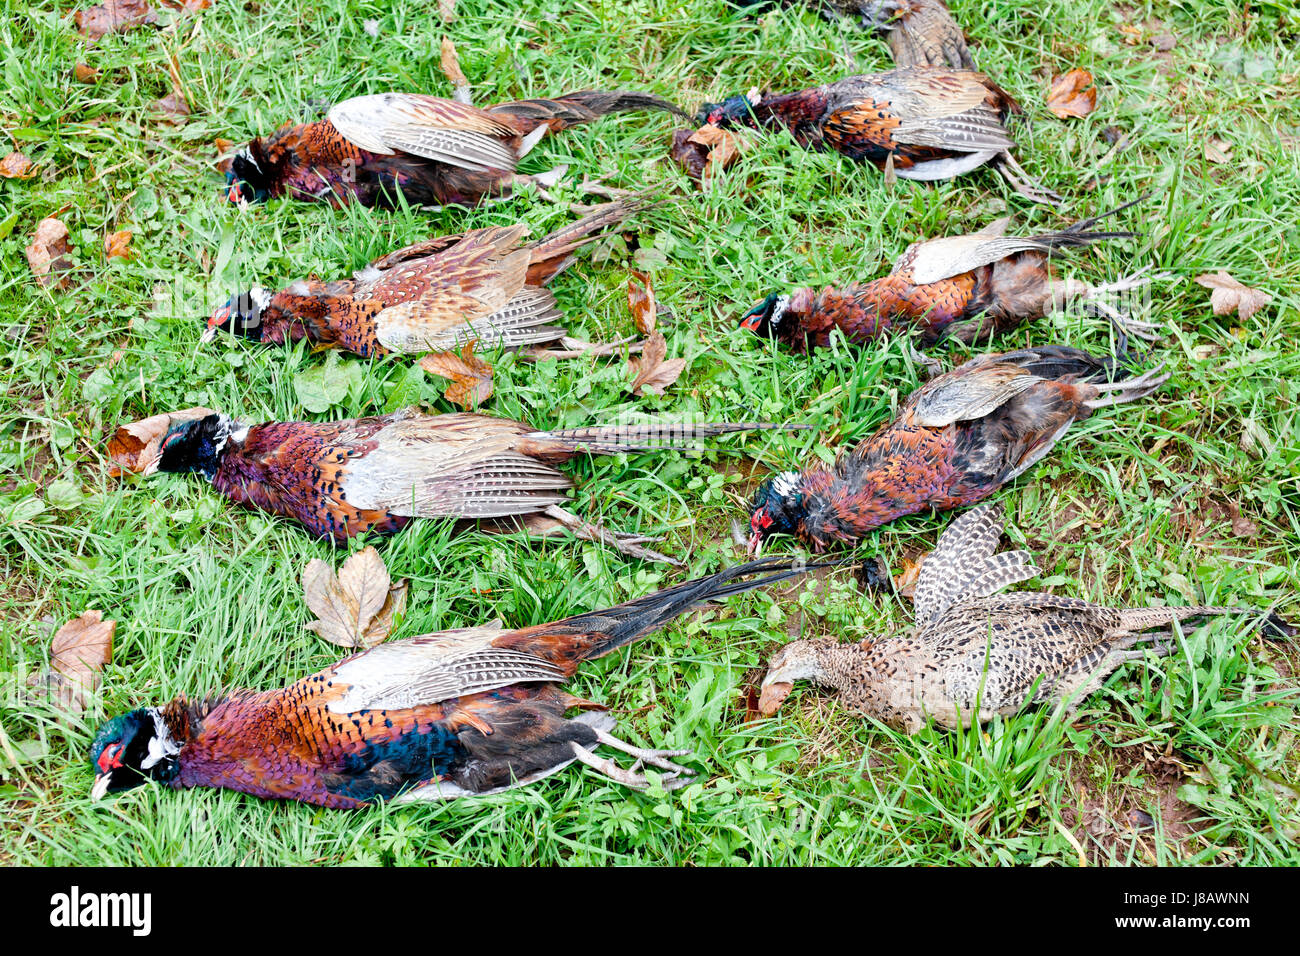 hunting, chase, still life, death, animal, fauna, wild, hunt, outside, Stock Photo